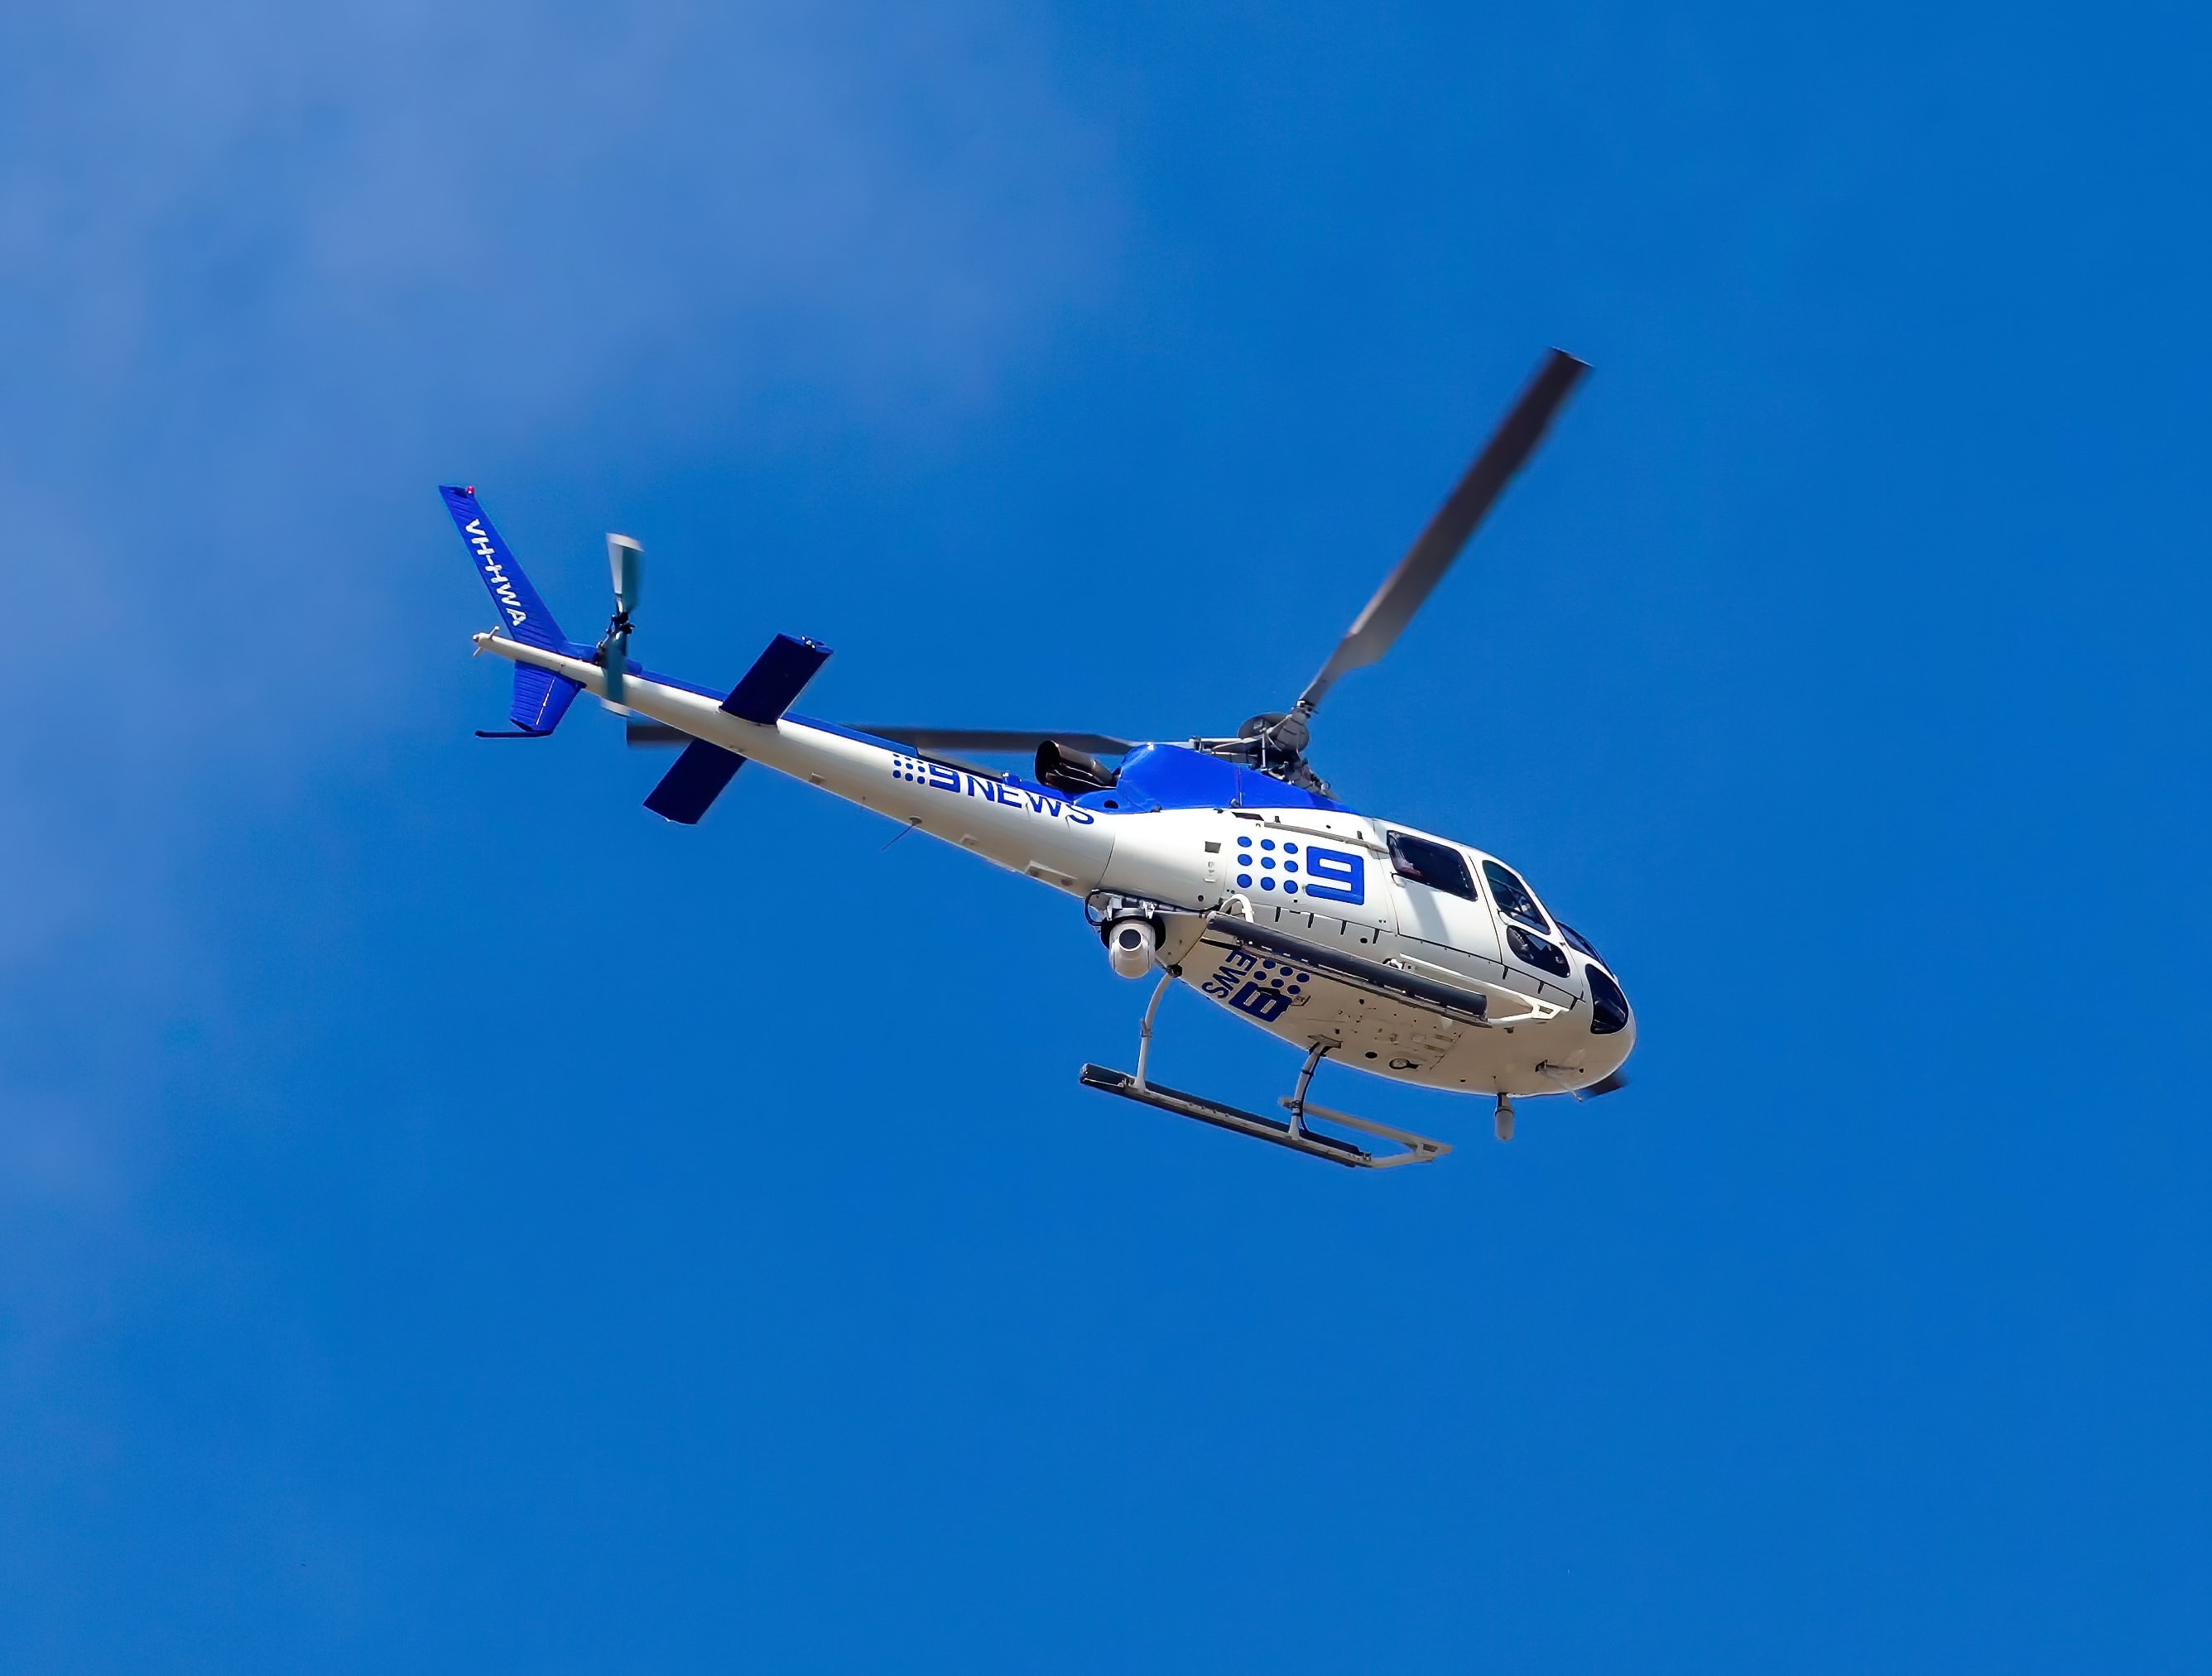 Facebook Live Best Practices - An image of a news helicopter